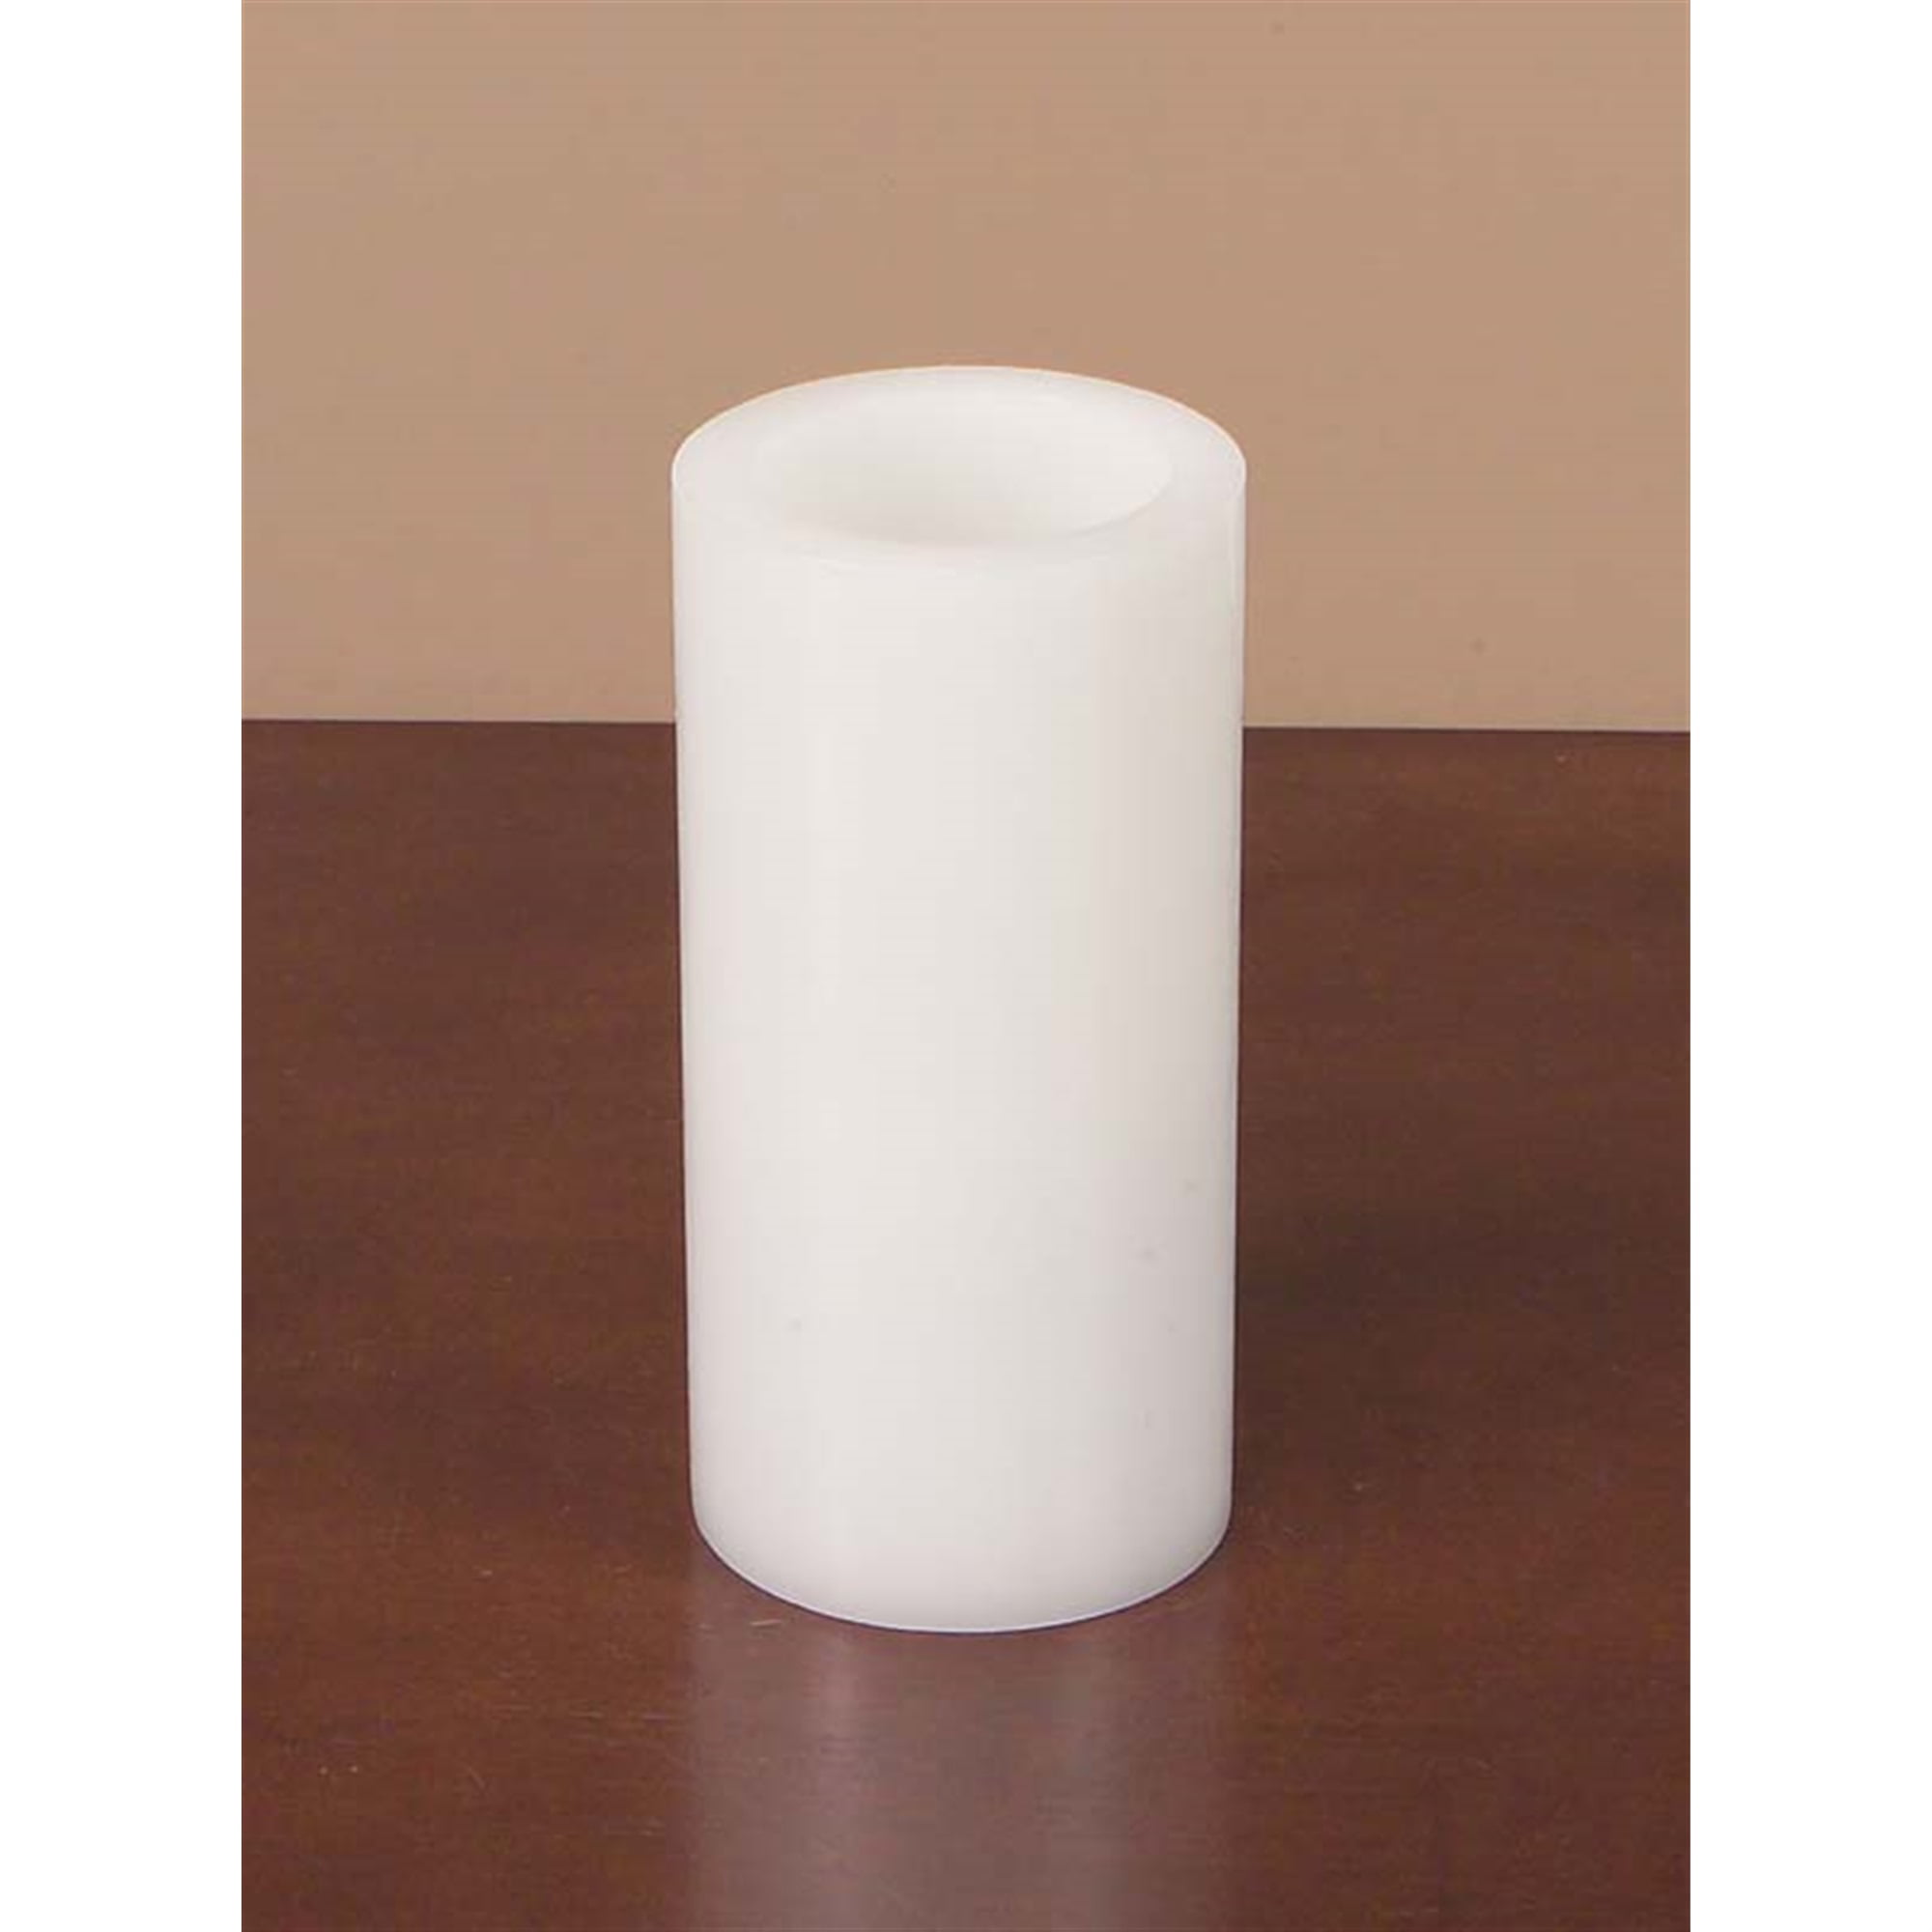 LED Wax Pillar Candle (Set of 6 ) 3"Dx6"H Wax/Plastic - 2 C Batteries Not Incld